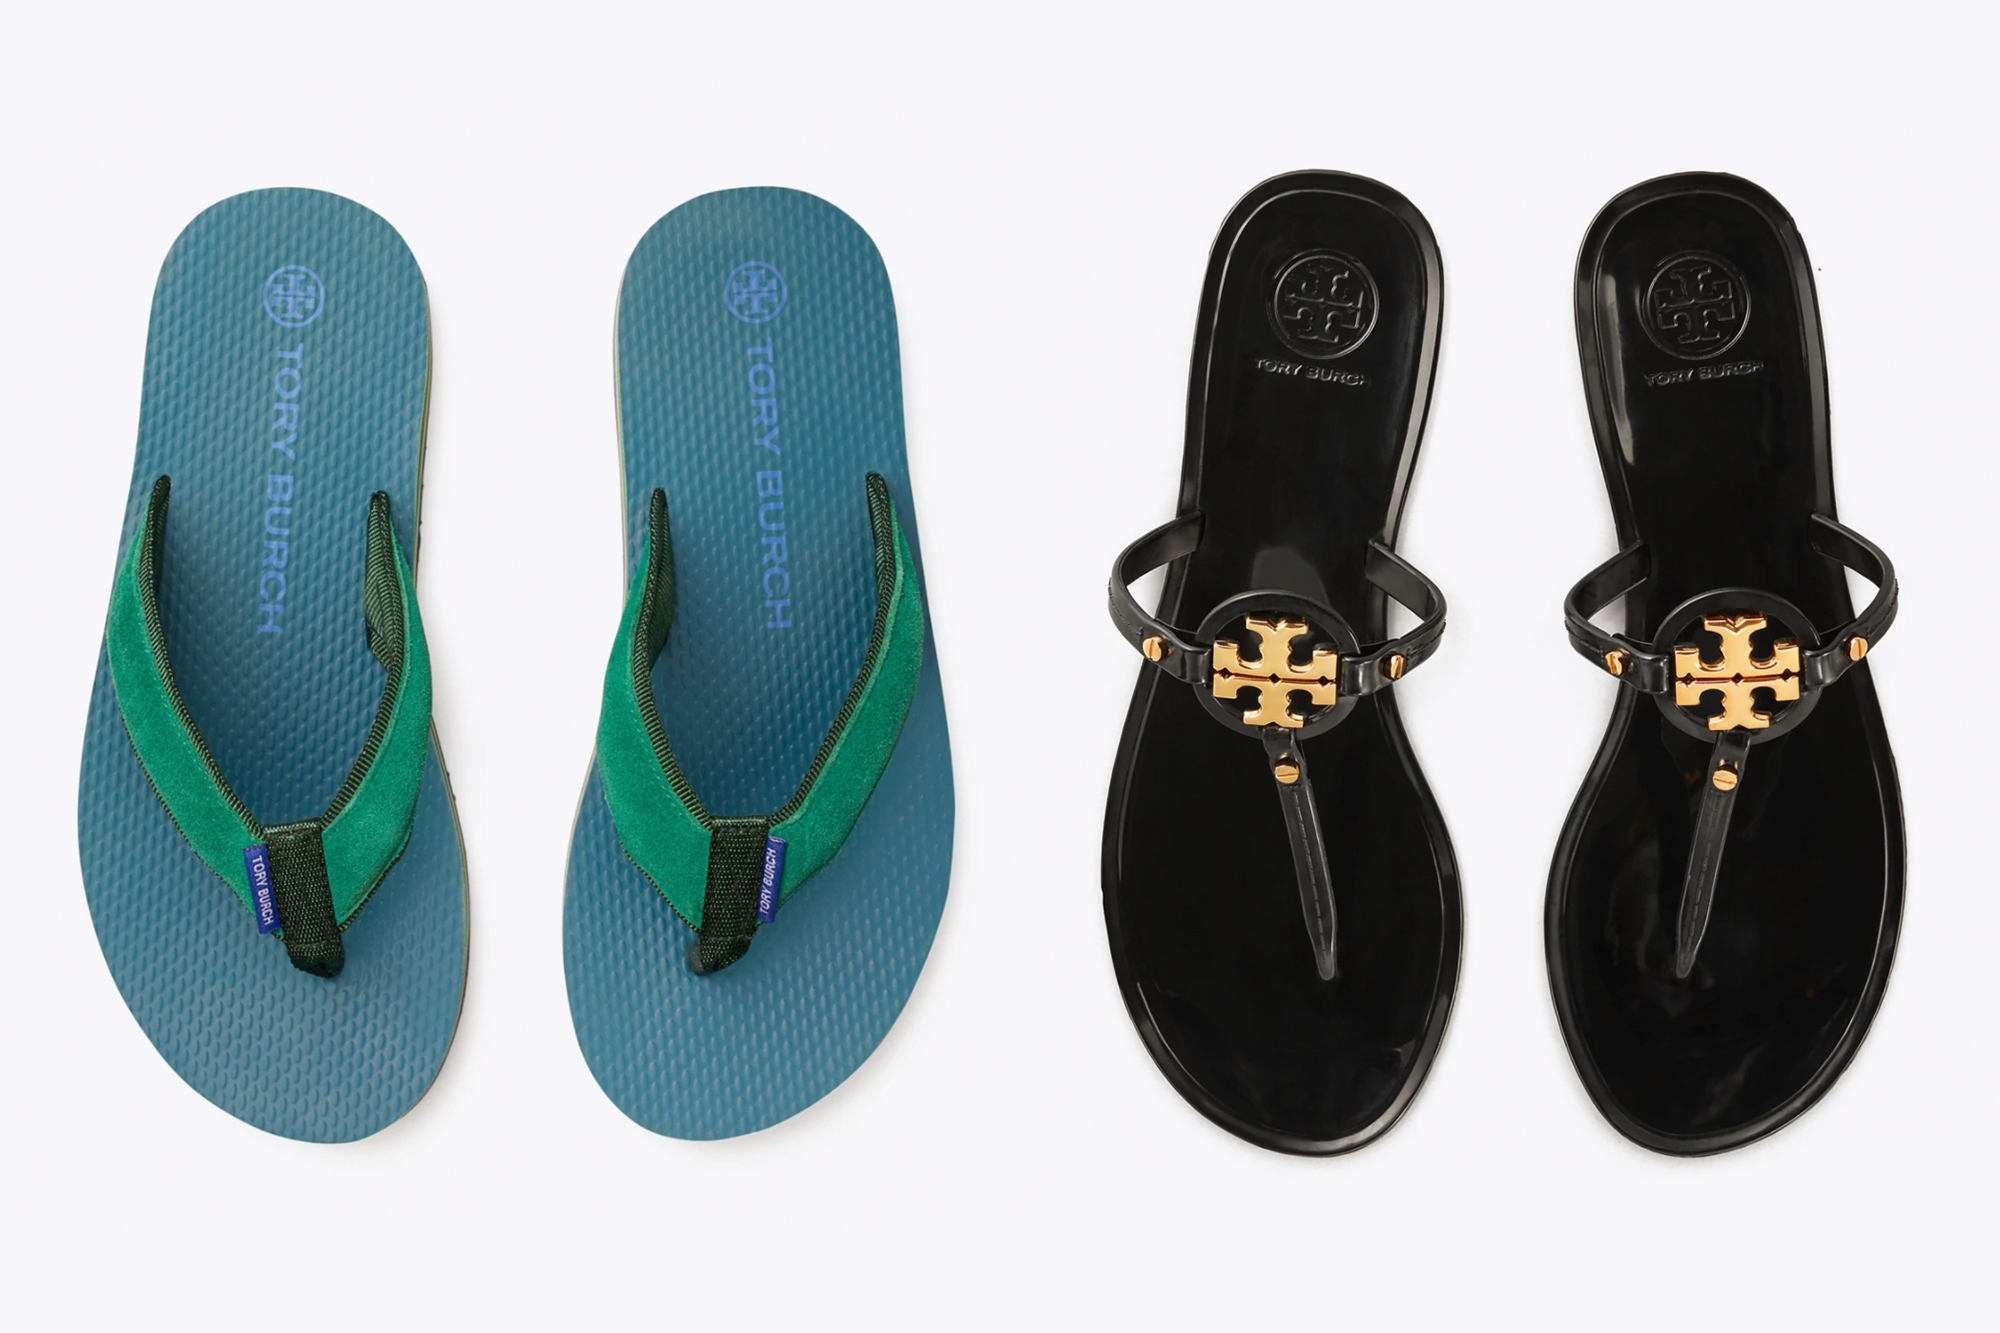 Nordstrom shoppers love these 'super classy' $118 Tory Burch slides